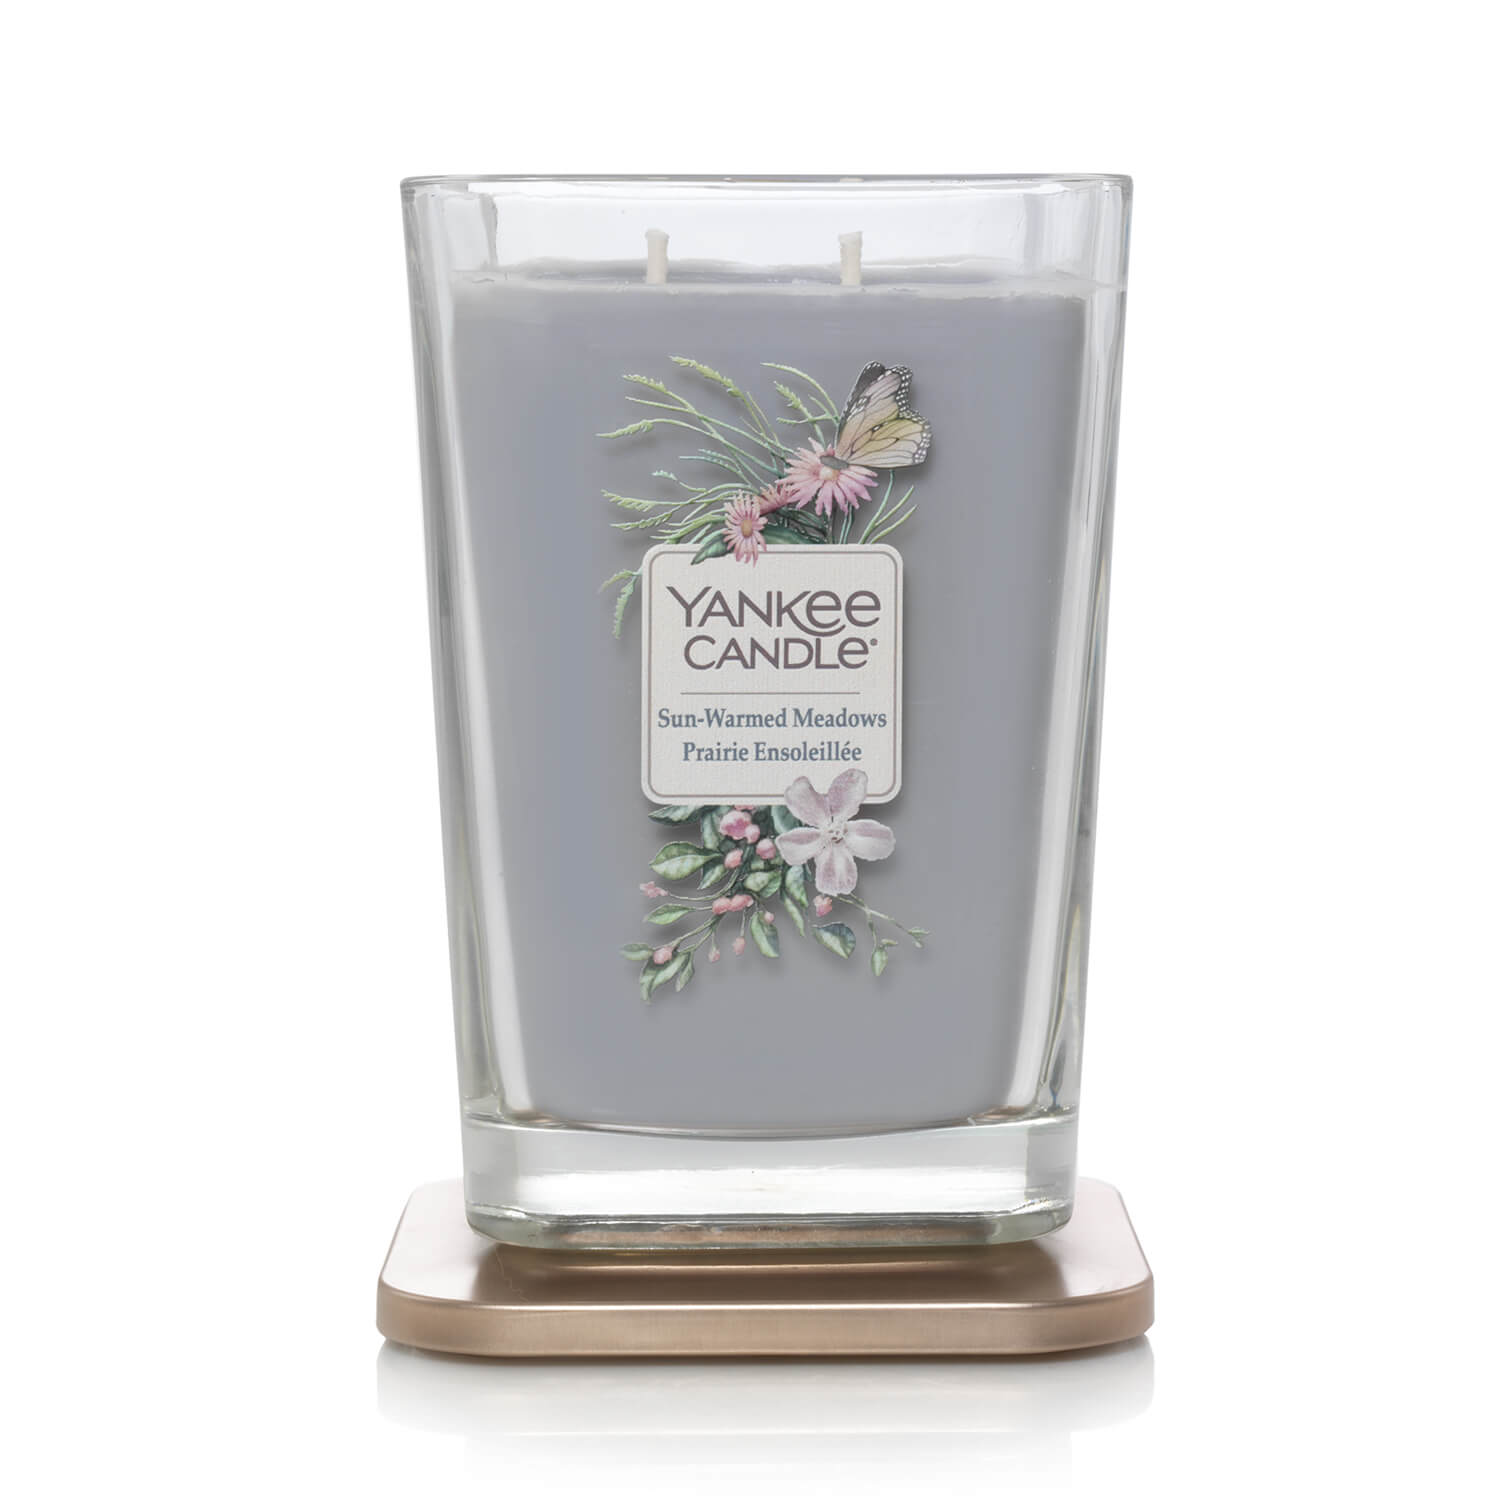 Yankee Candle Elevation Large Jar 2-Wick Candle - Sun-Warmed Meadows 1 Shaws Department Stores